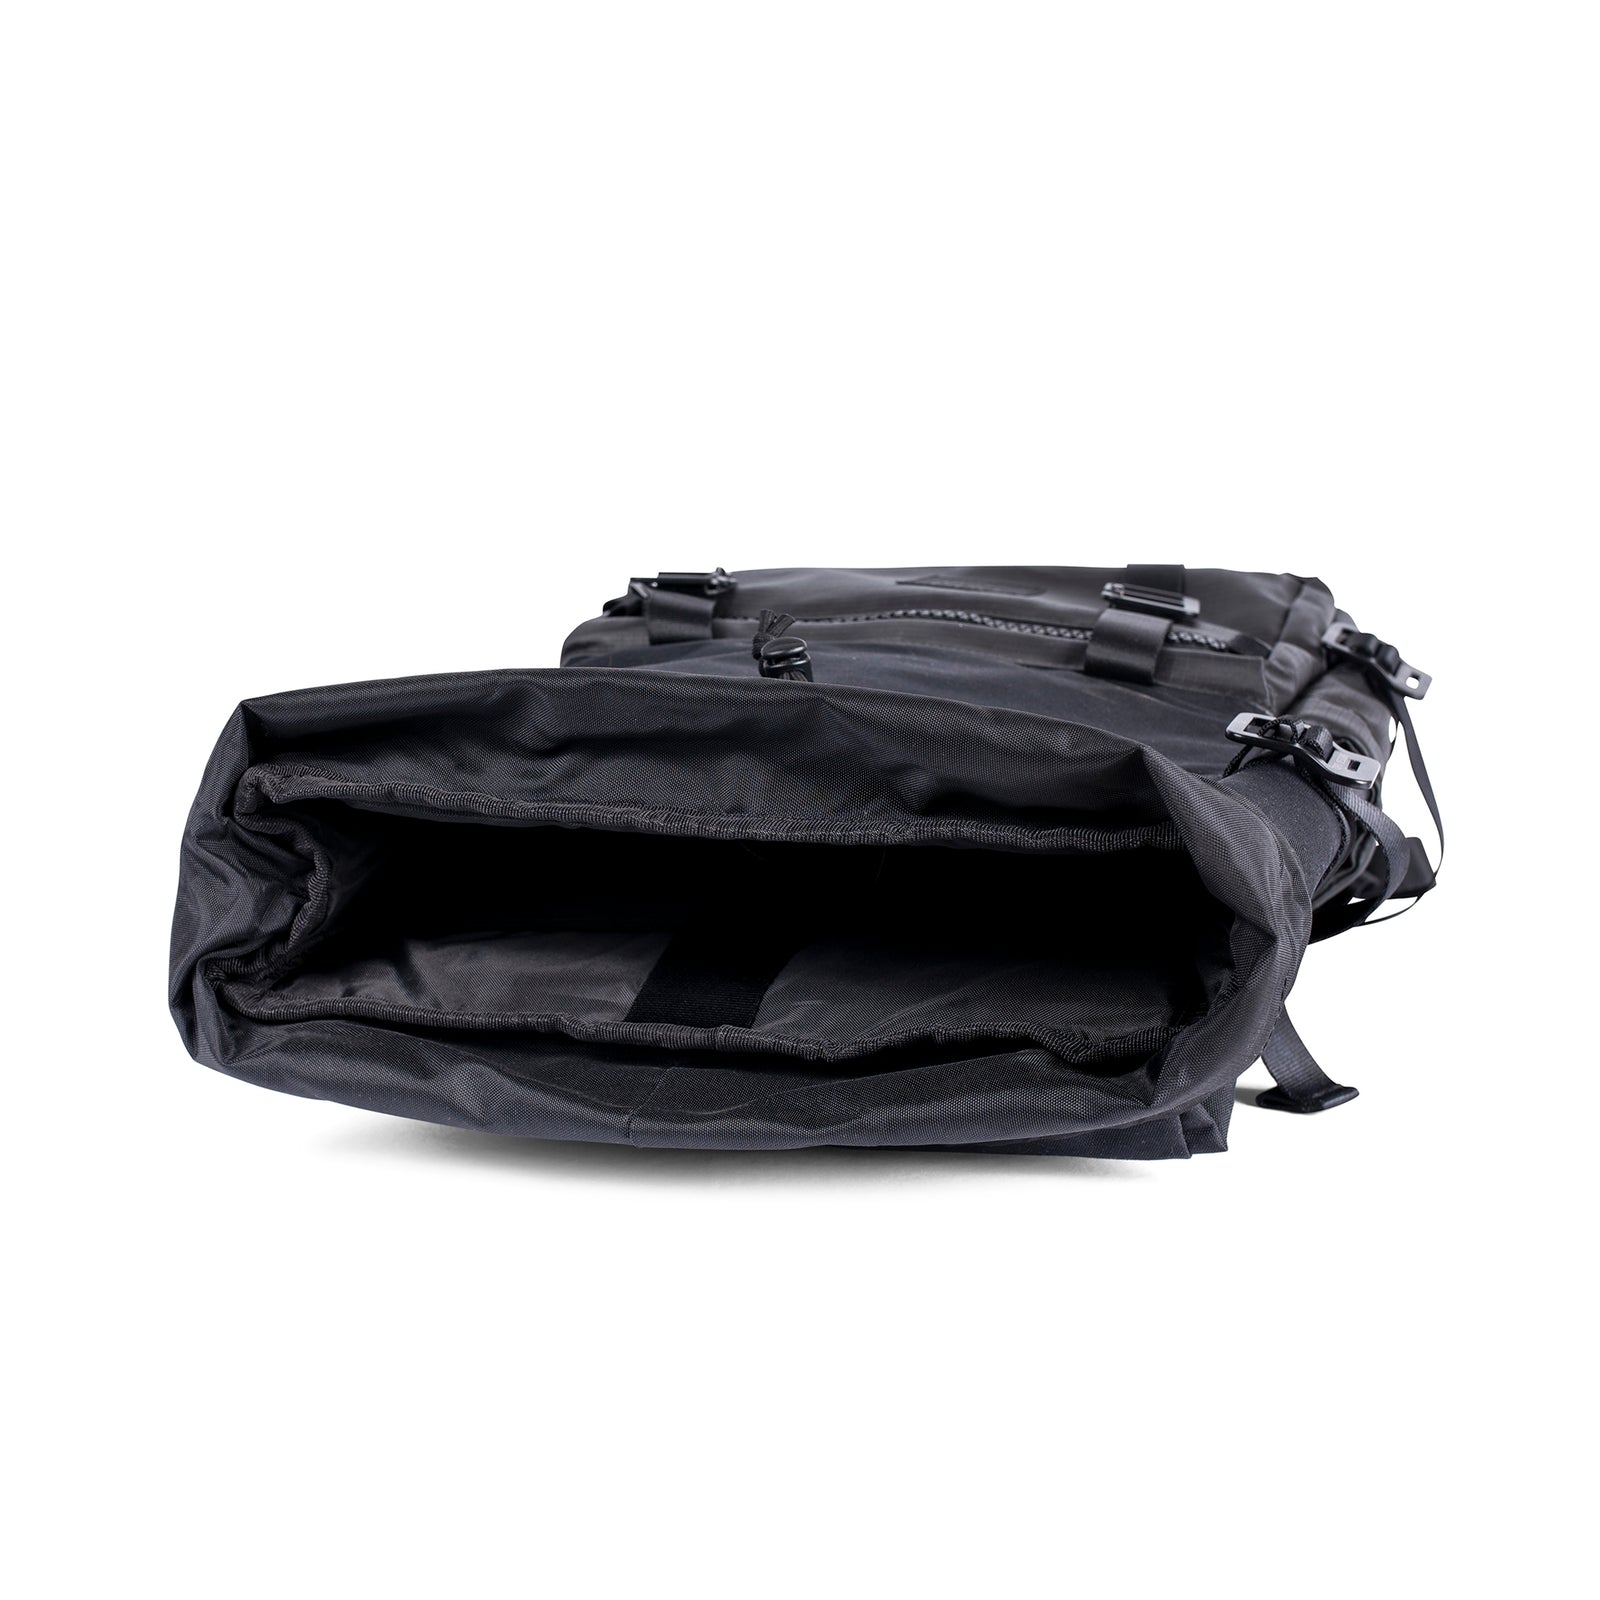 Detail Shot of the Topo Designs Rover Pack Premium showing the inside of the bag in "Premium Black".